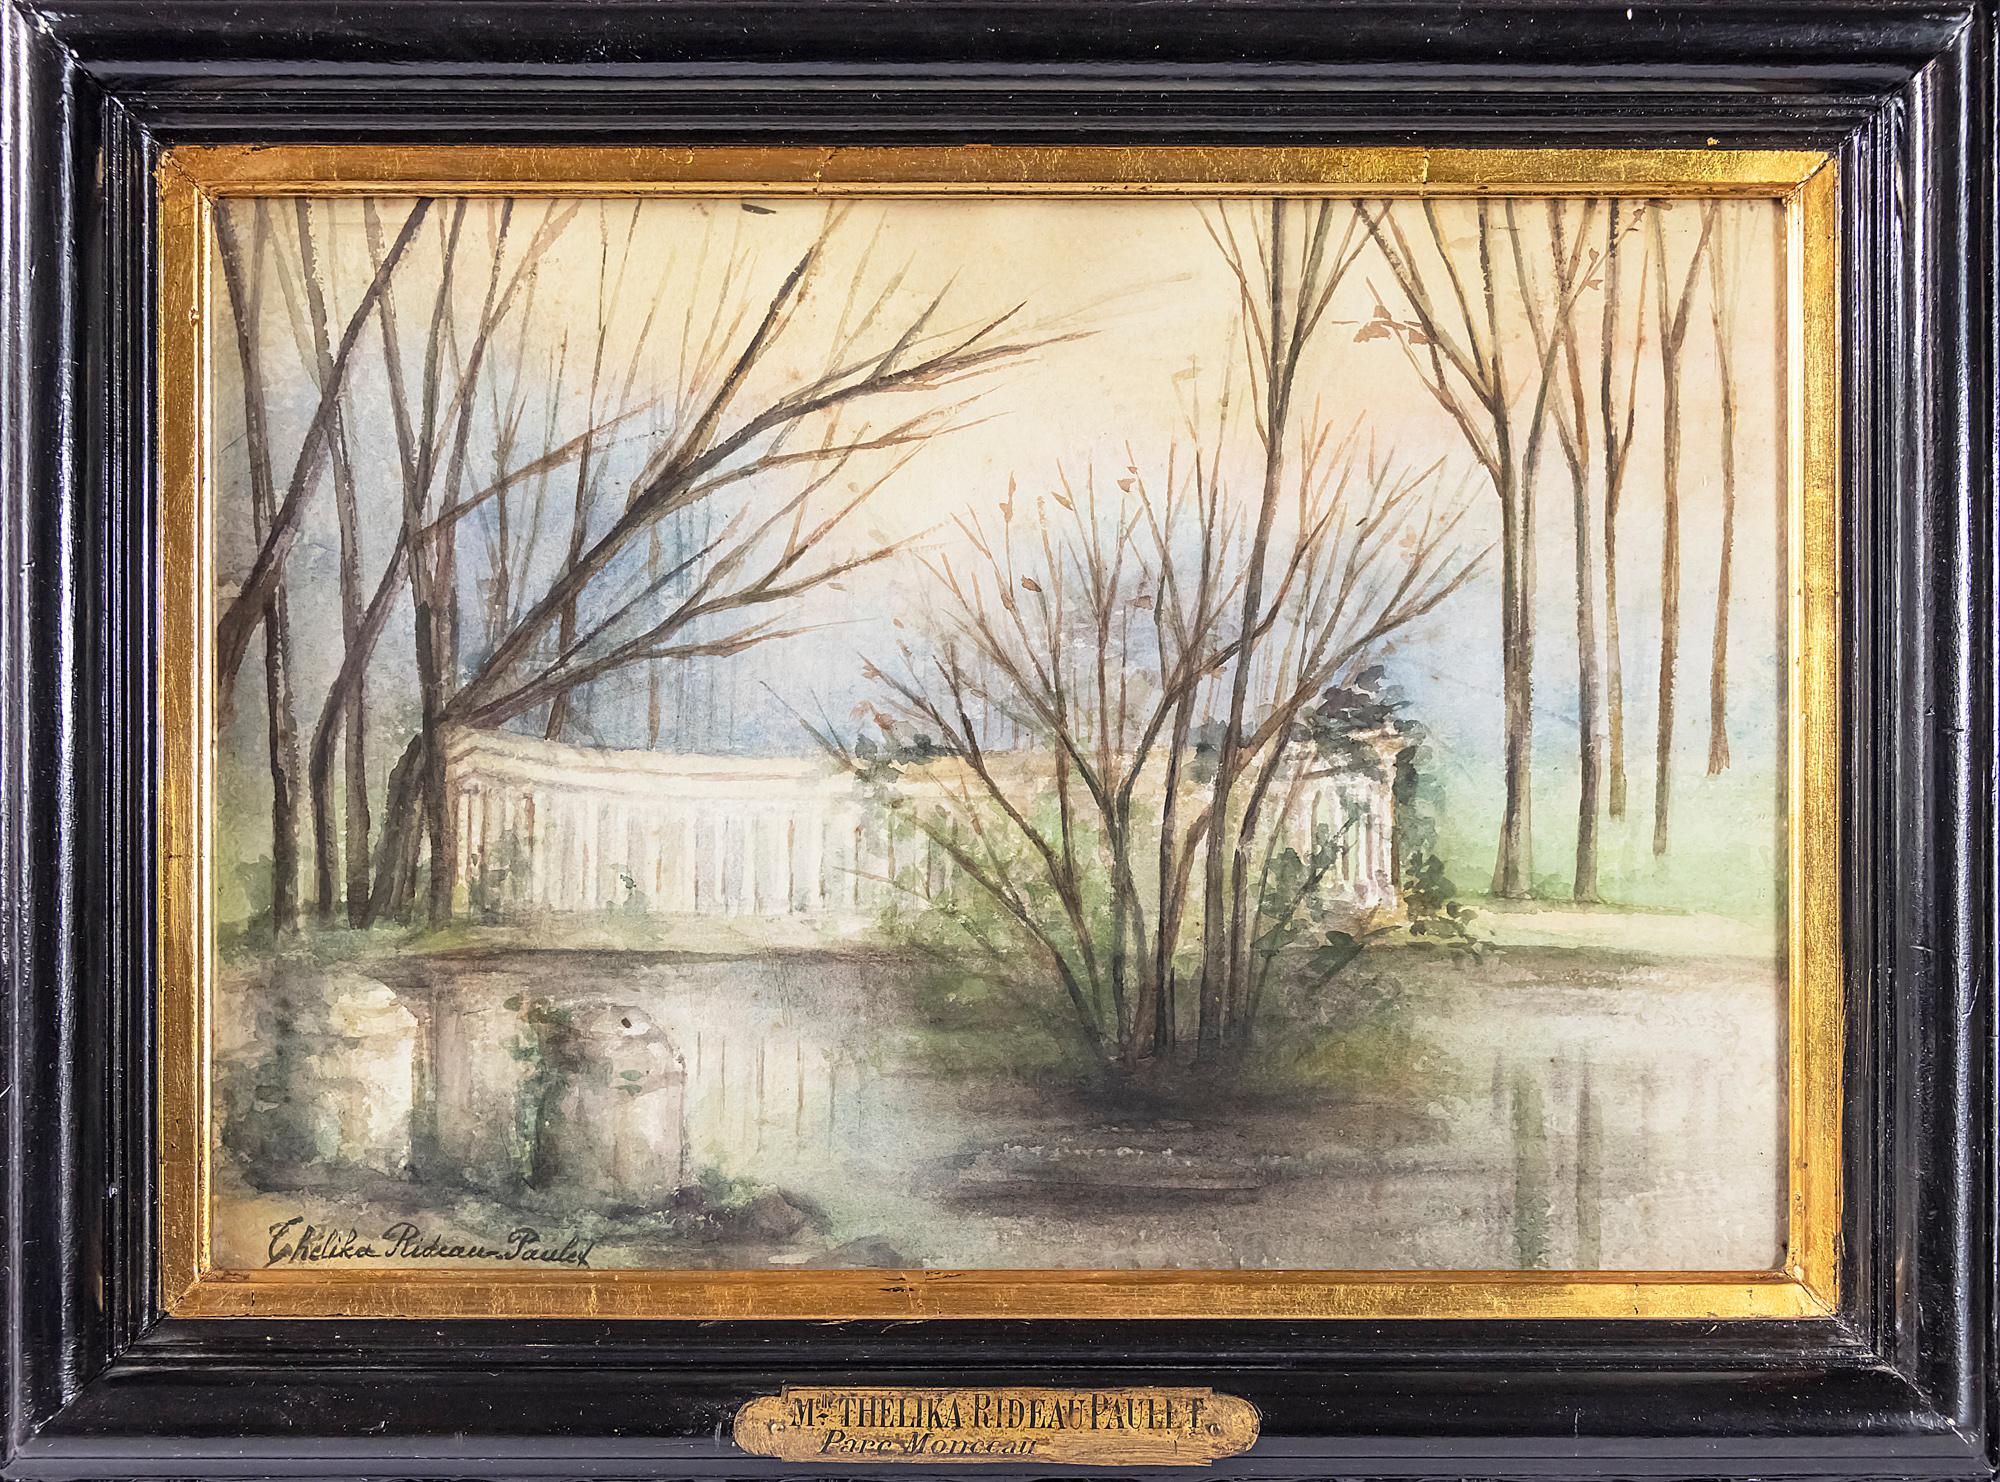 Framed antique 19th century painting by French painter Marie Thelika Rideau Paulet, signed.
Aquarelle on paper depicting Parc Monceau in Paris.
Framed in wooden black frame with gilt decor and label.

